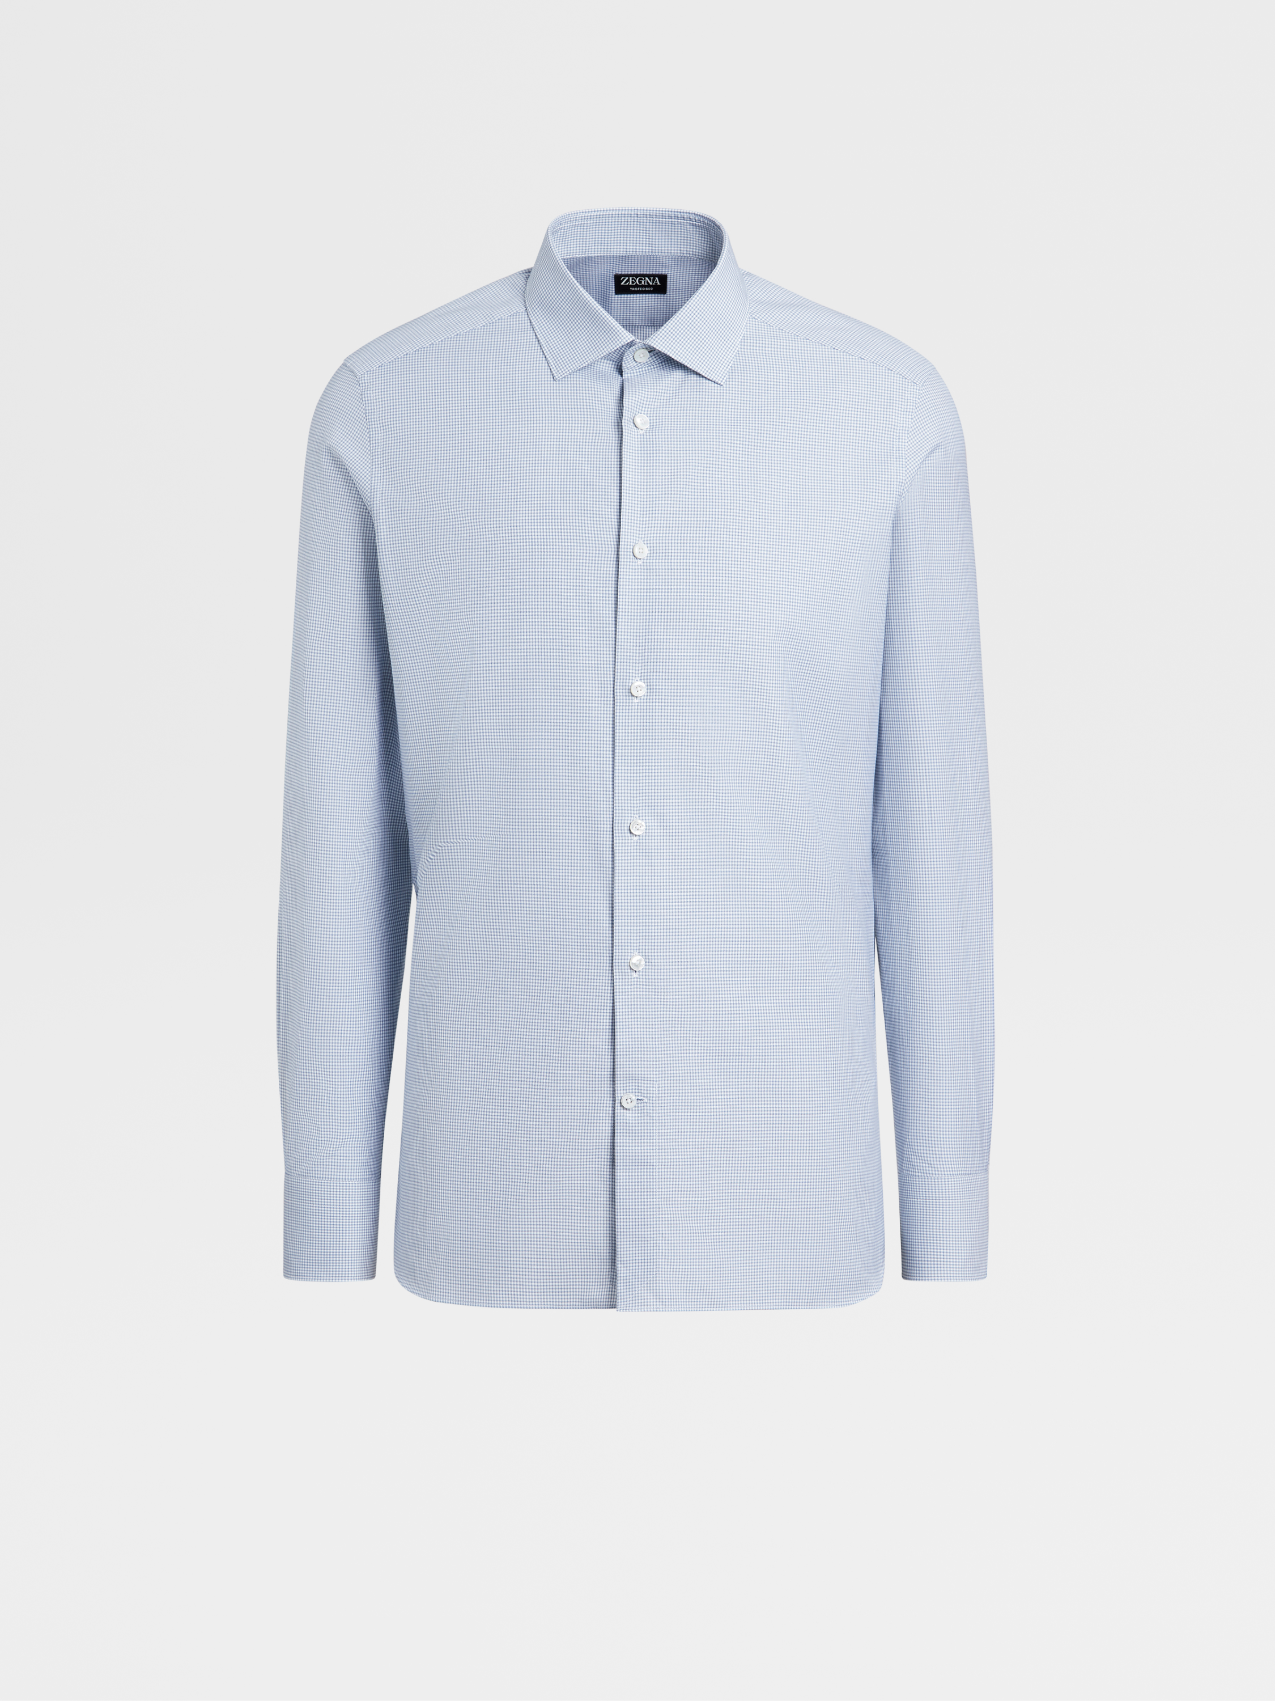 Navy Blue and White Micro-checked Trofeo™ 600 Cotton and Silk Shirt